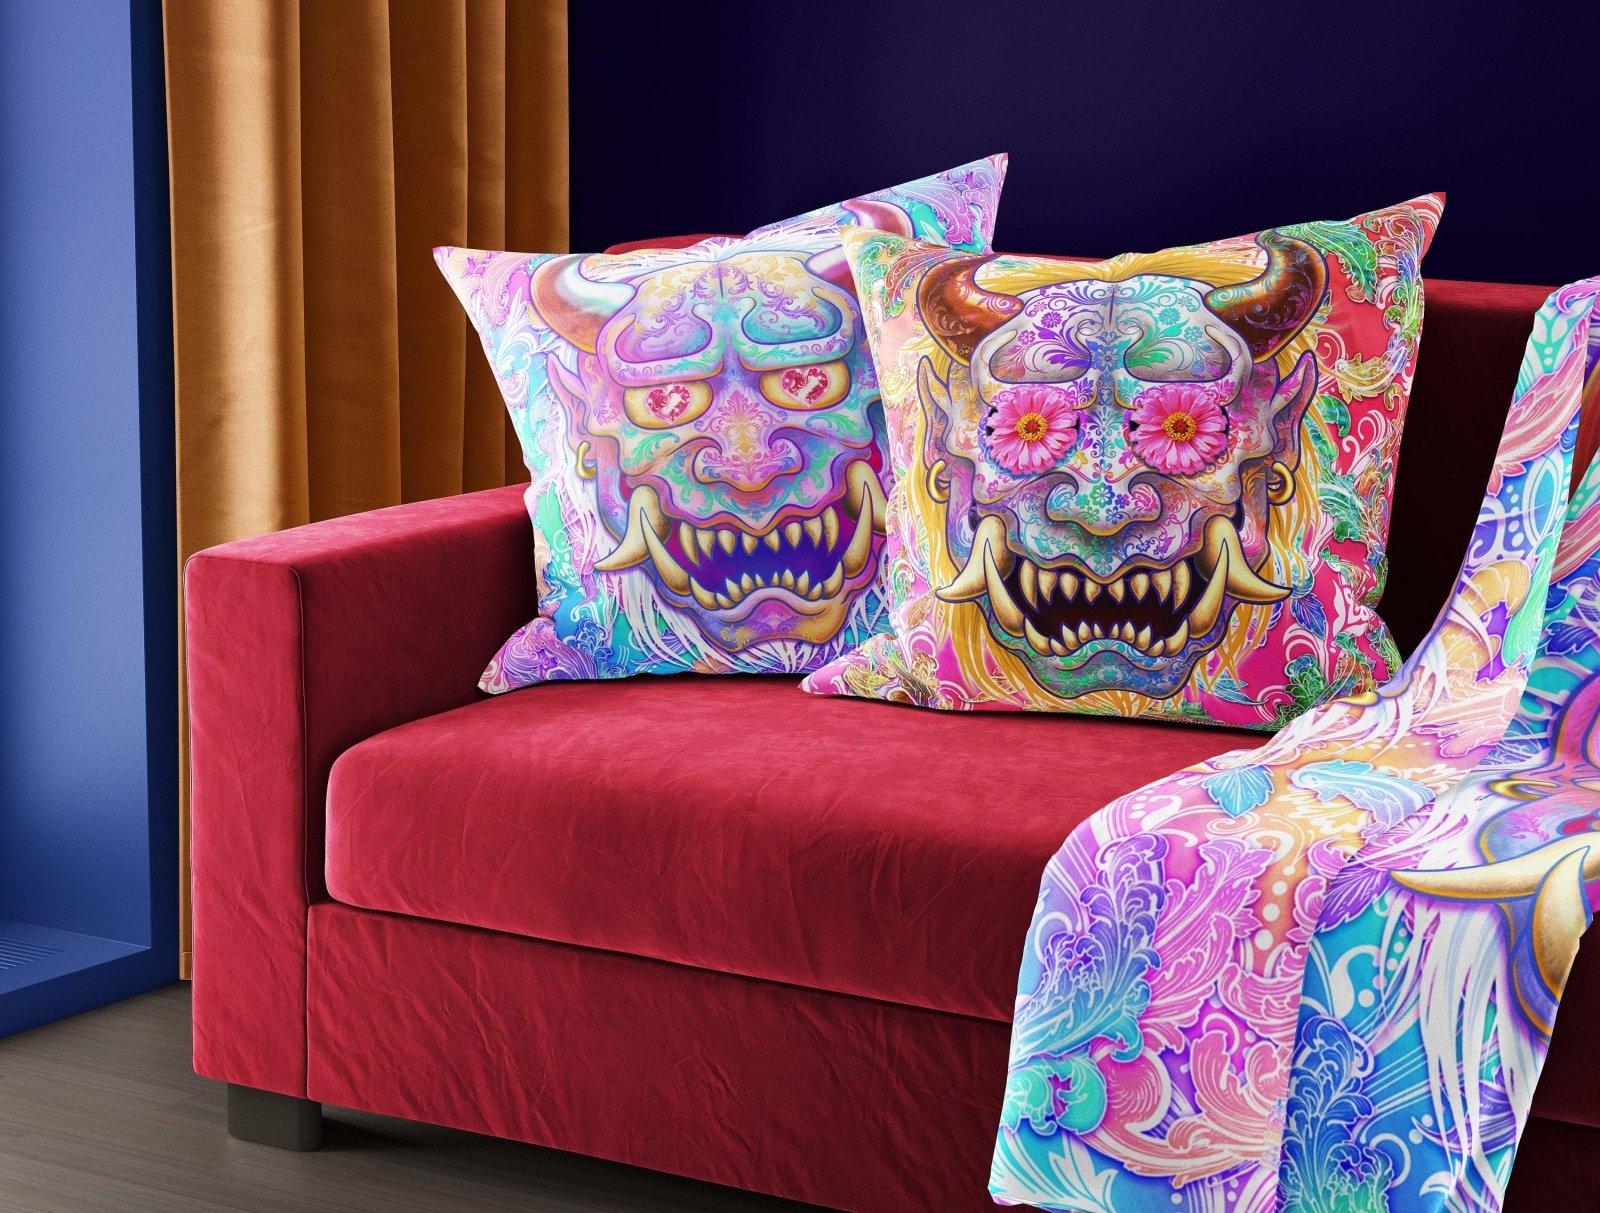 Aesthetic Throw Pillow, Decorative Accent Cushion, Japanese Demon, Indie Room Decor, Funky and Eclectic Home - Pastel Oni or Hannya - Abysm Internal